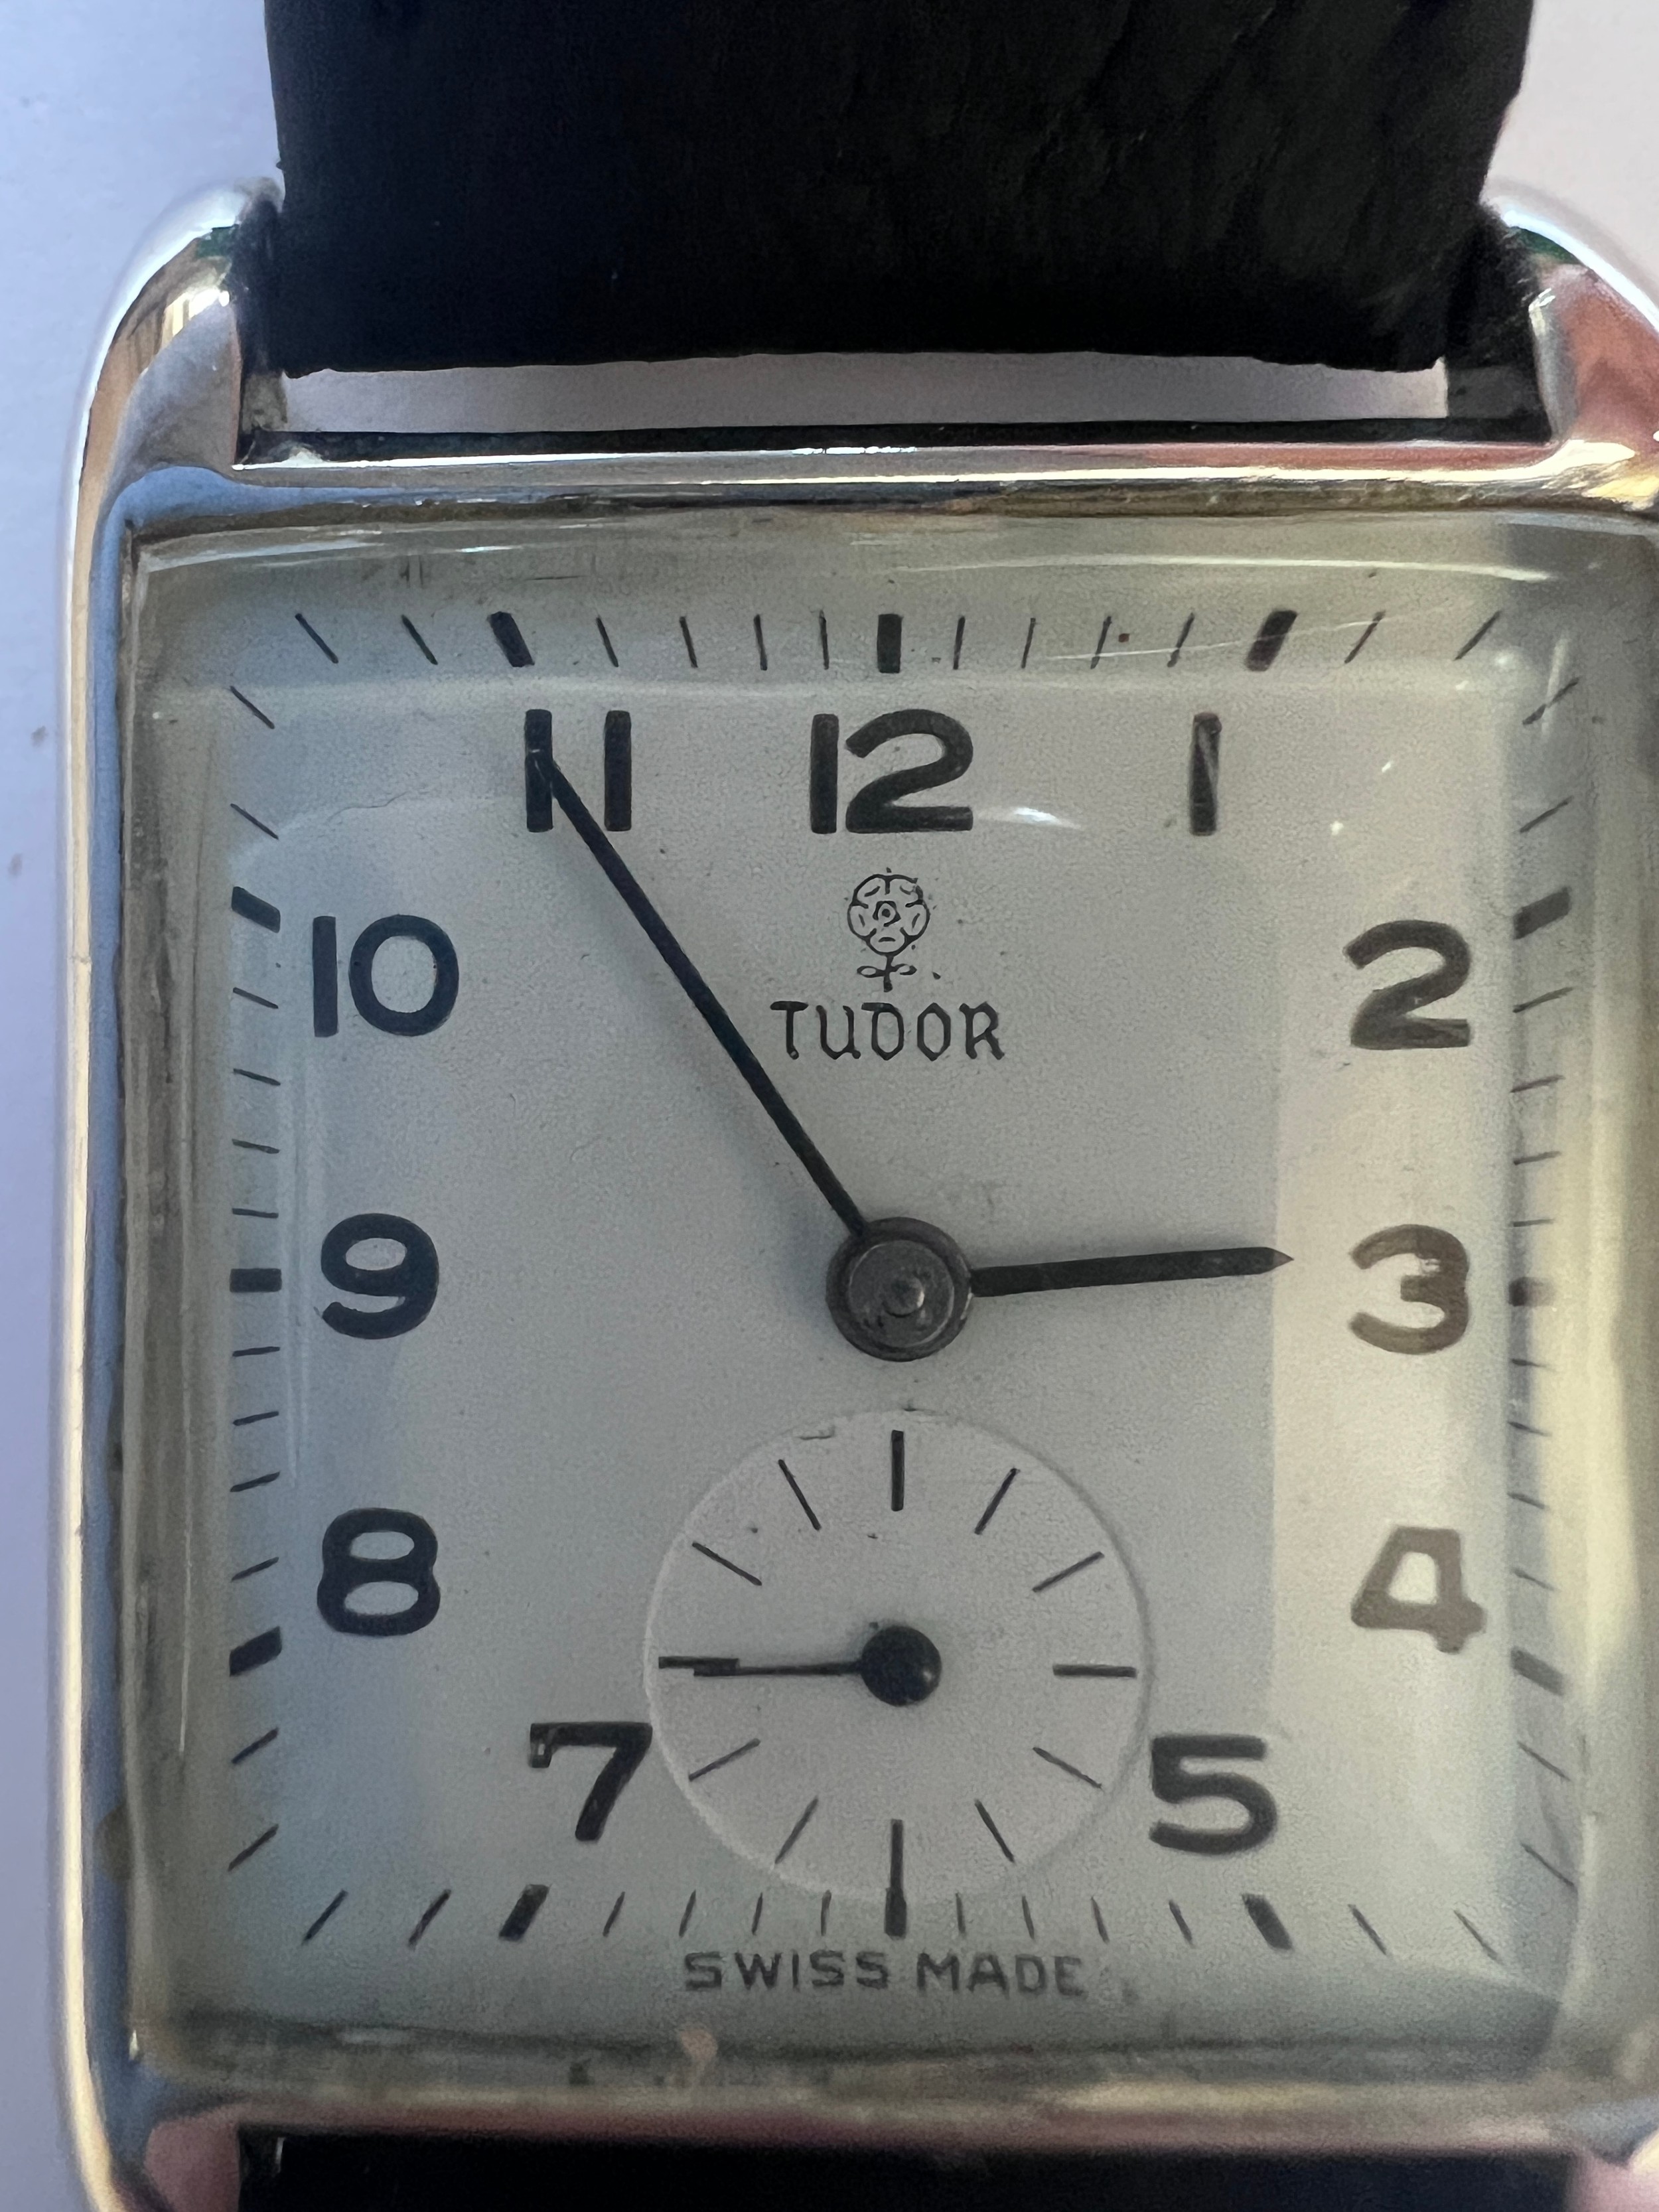 A vintage Rolex Tudor hand winding wristwatch on black leather strap, chrome case and ivory dial